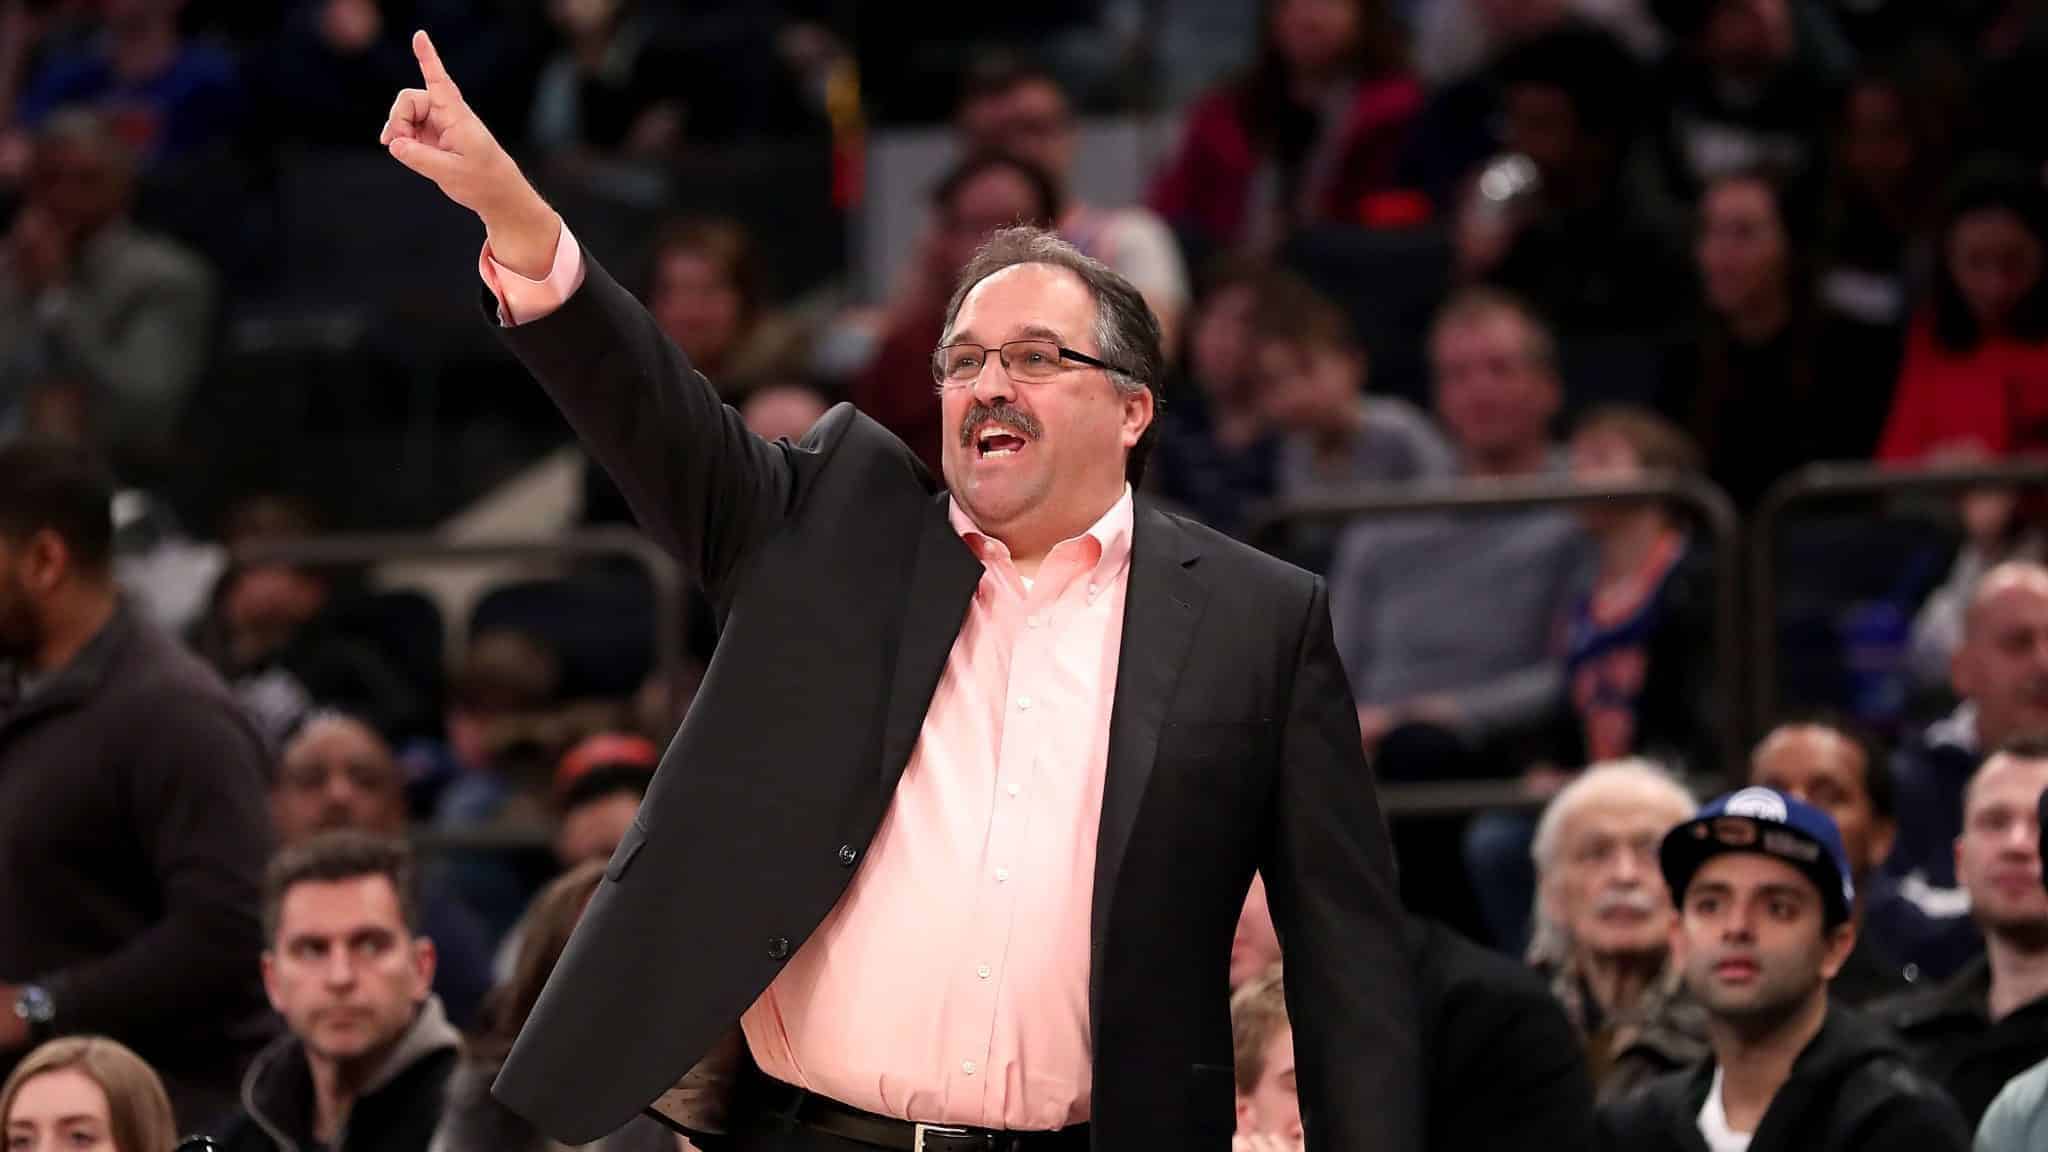 NEW YORK, NY - MARCH 31: Stan Van Gundy of the Detroit Pistons reacts in the third quarter against the New York Knicks during their game at Madison Square Garden on March 31, 2018 in New York City. NOTE TO USER: User expressly acknowledges and agrees that, by downloading and or using this photograph, User is consenting to the terms and conditions of the Getty Images License Agreement.